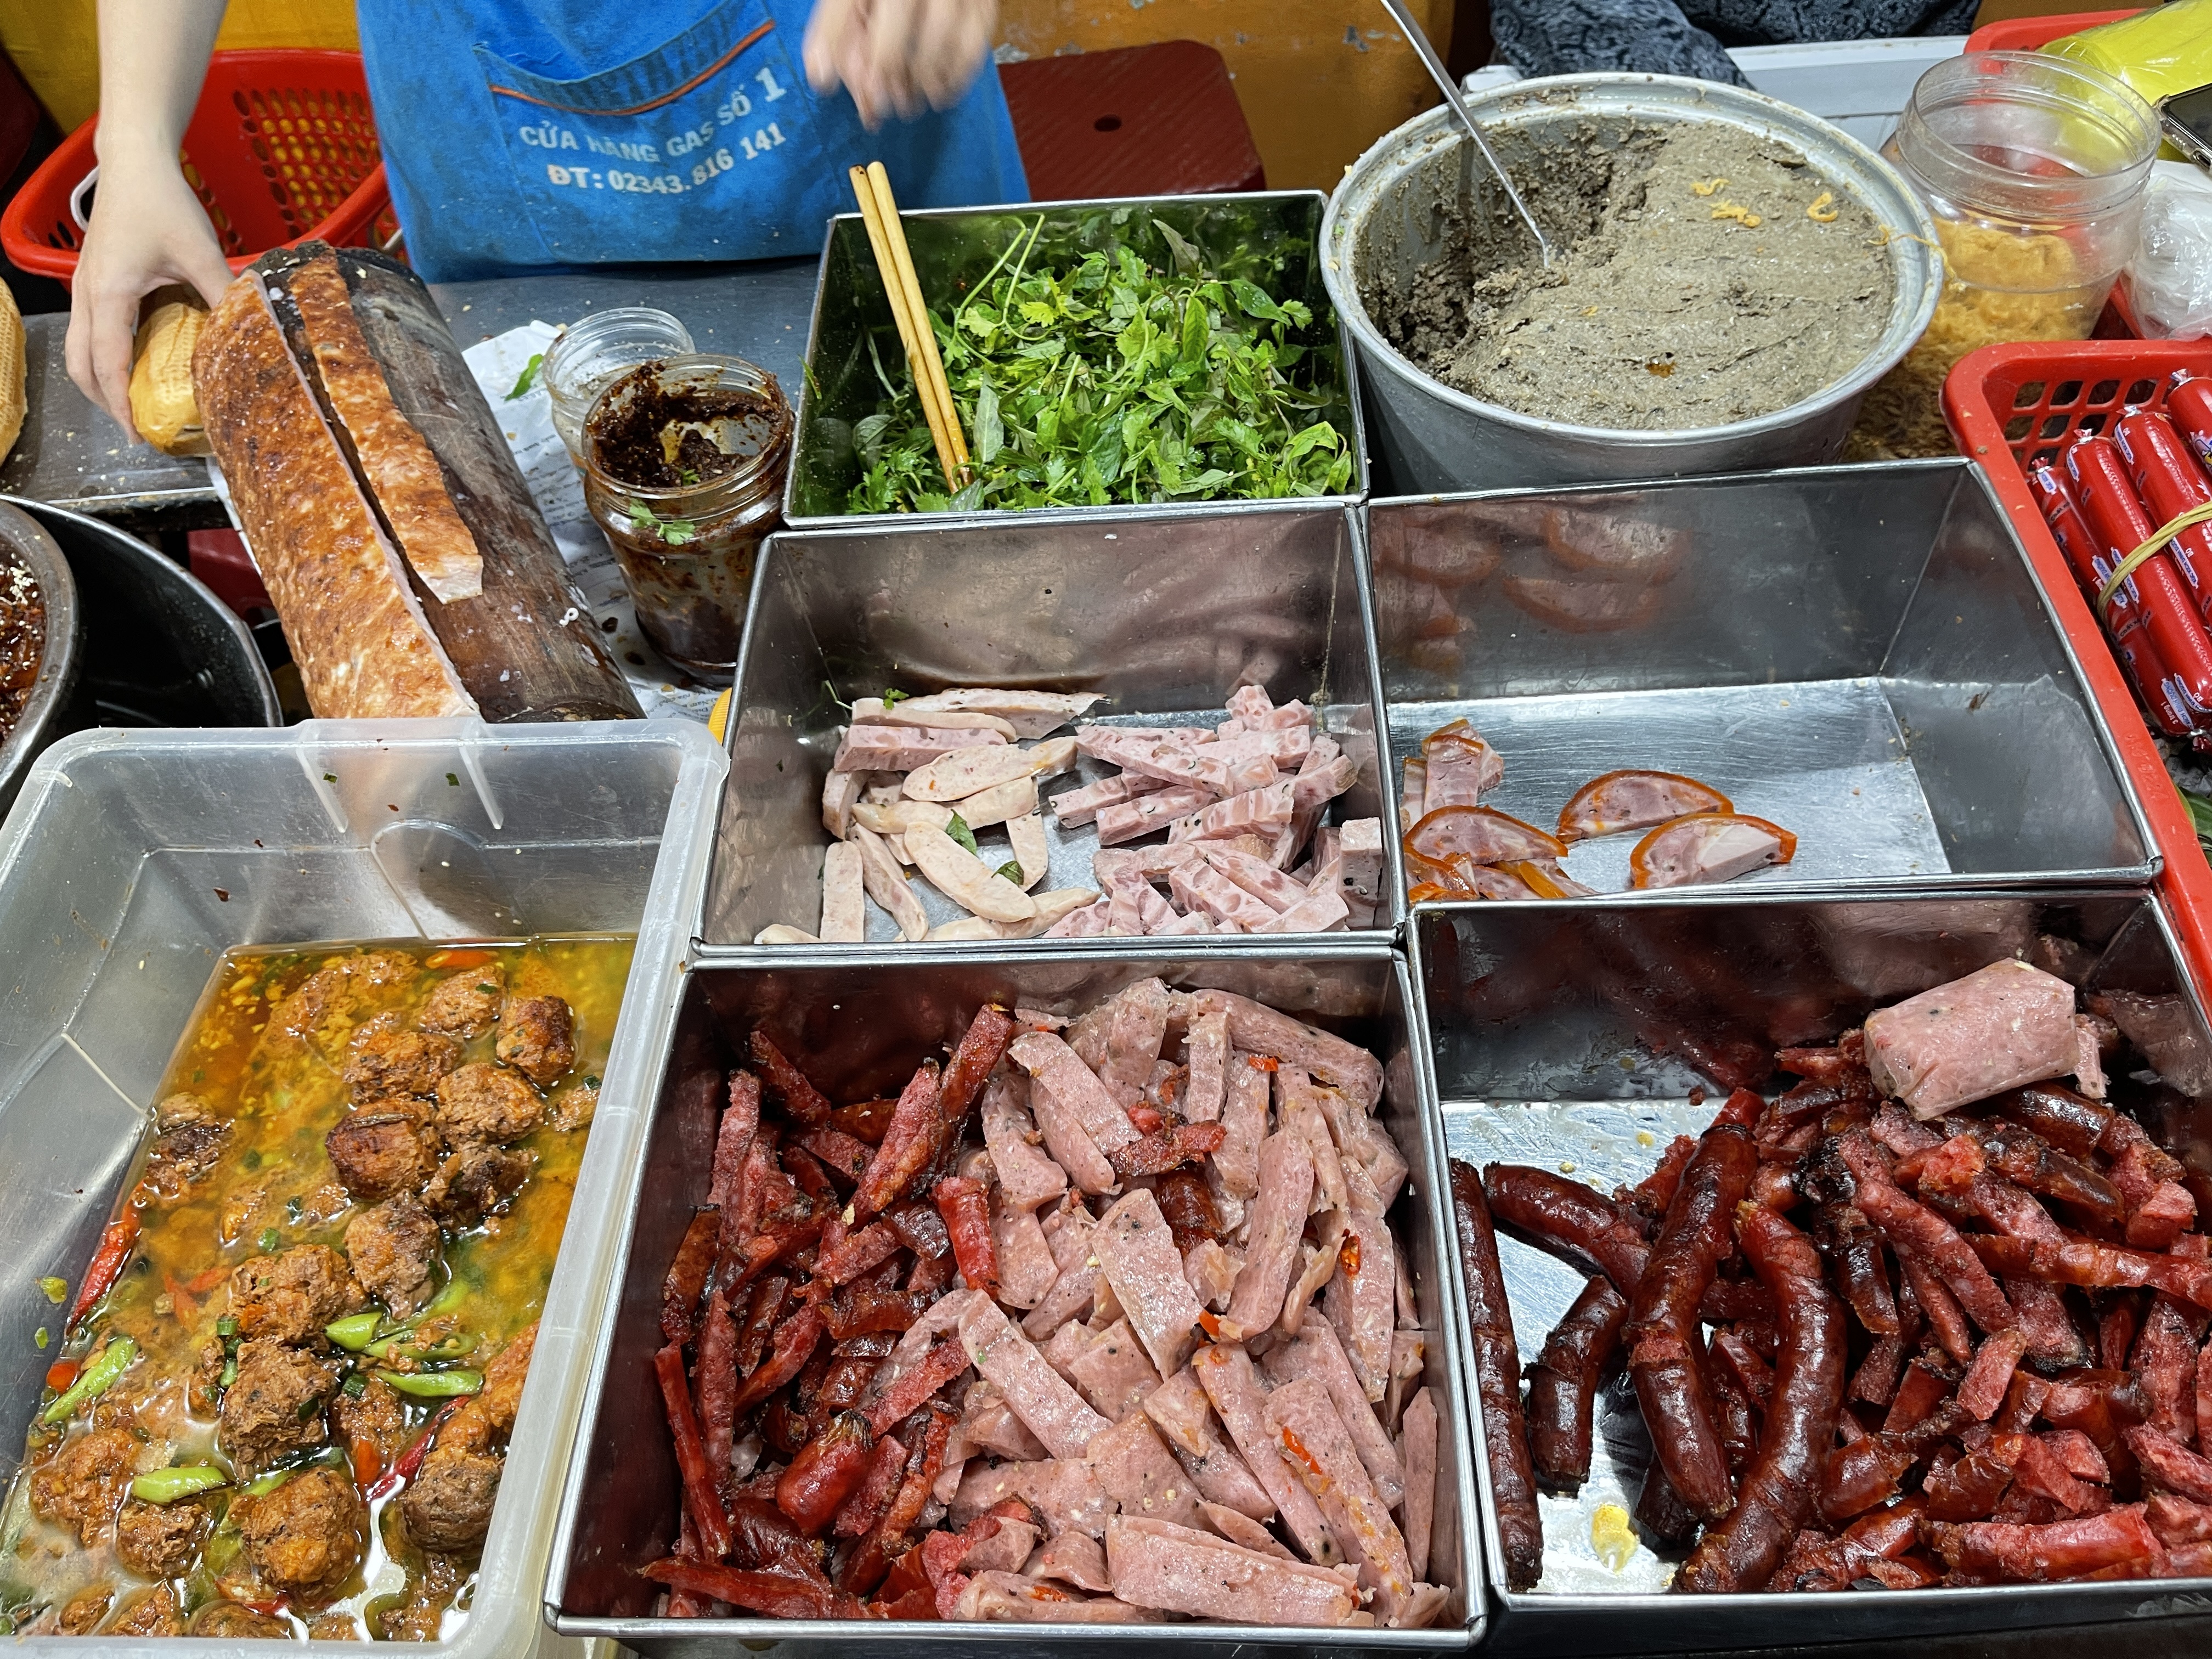 Fillings of ‘bánh mì’ are displayed at at Bánh Mì Trường Tiền O Tho shop in Hue City, Vietnam. Photo: Dong Nguyen / Tuoi Tre News